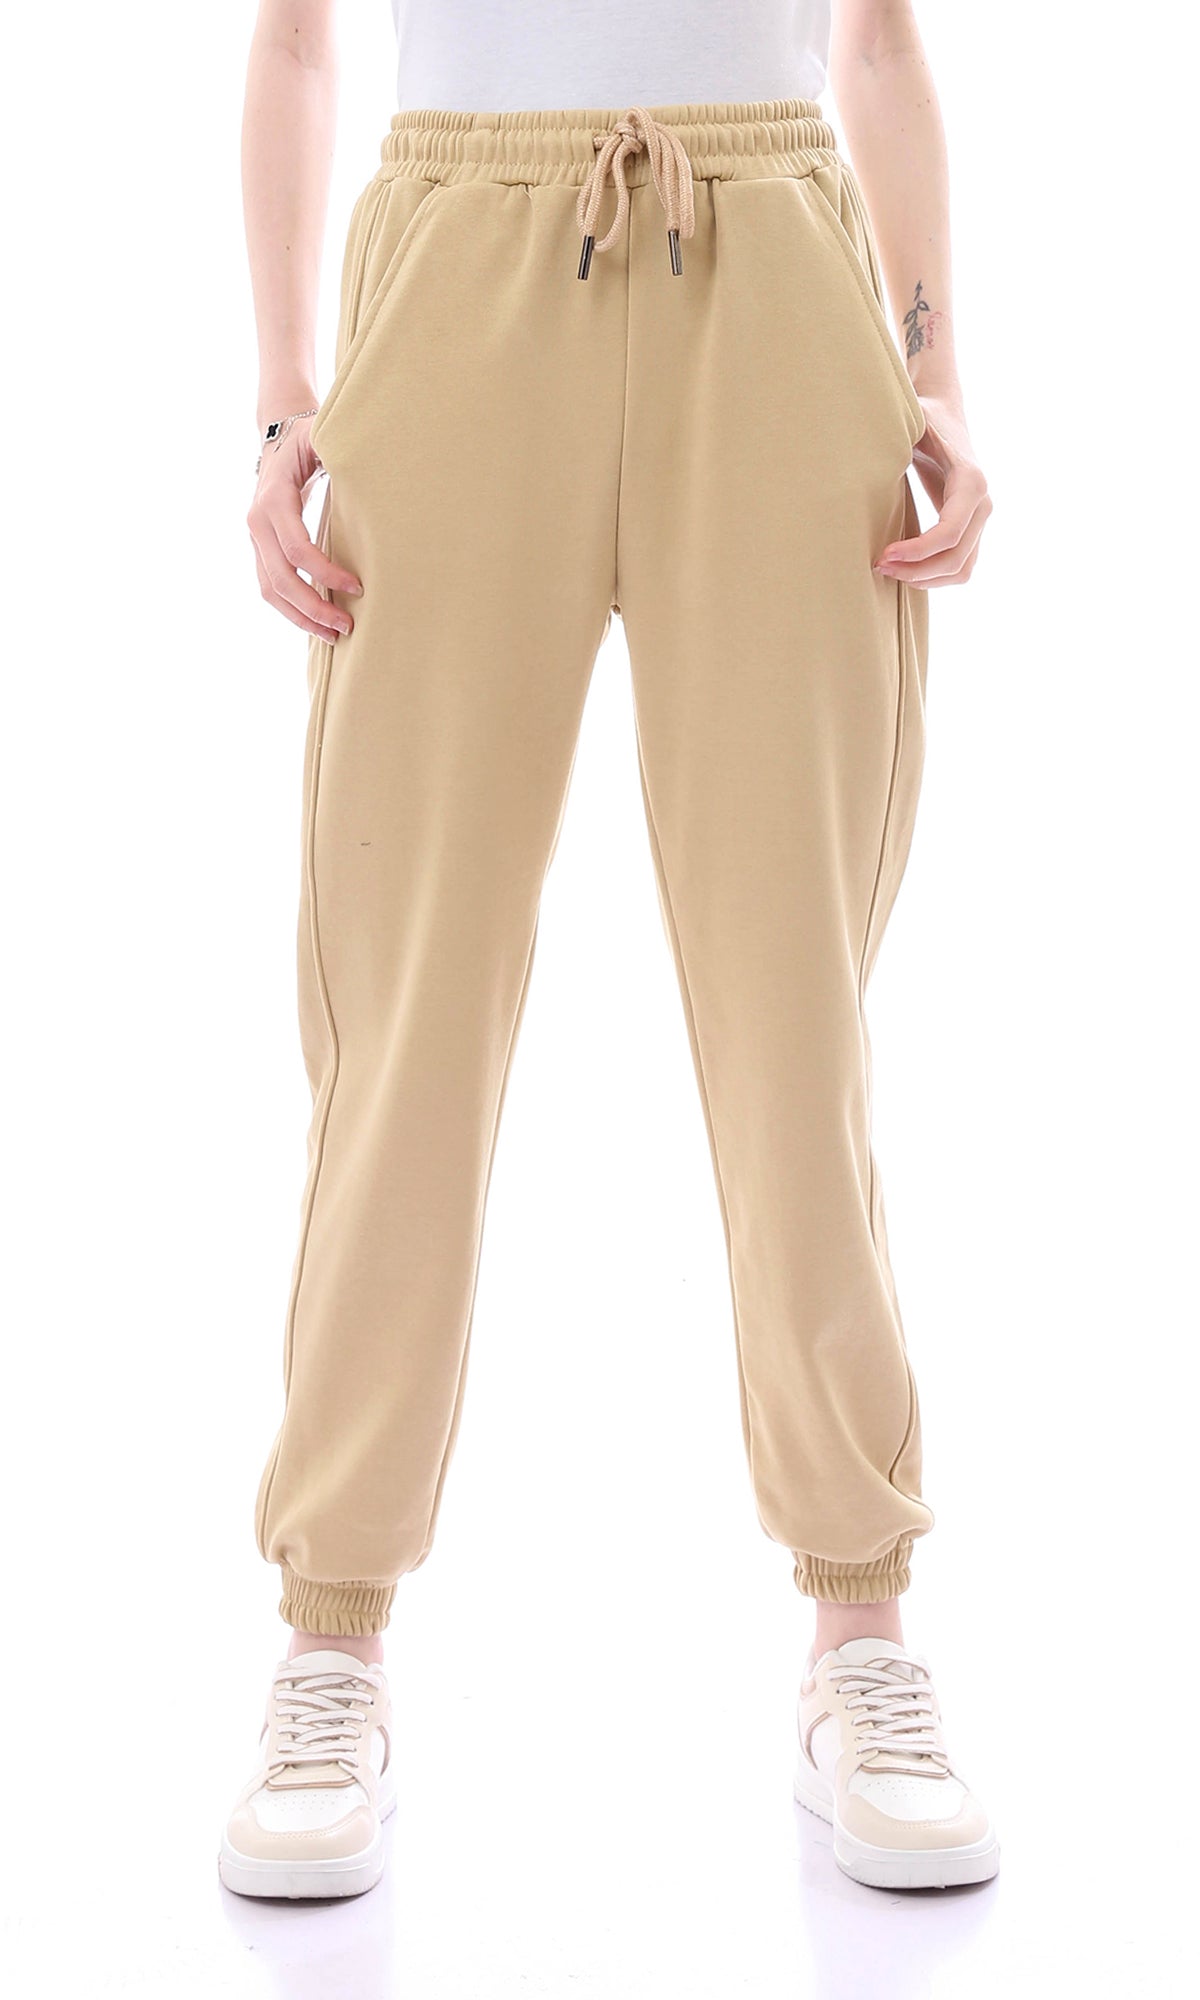 O165842 Dark Beige Solid Cotton Sweatpants With Side Pockets